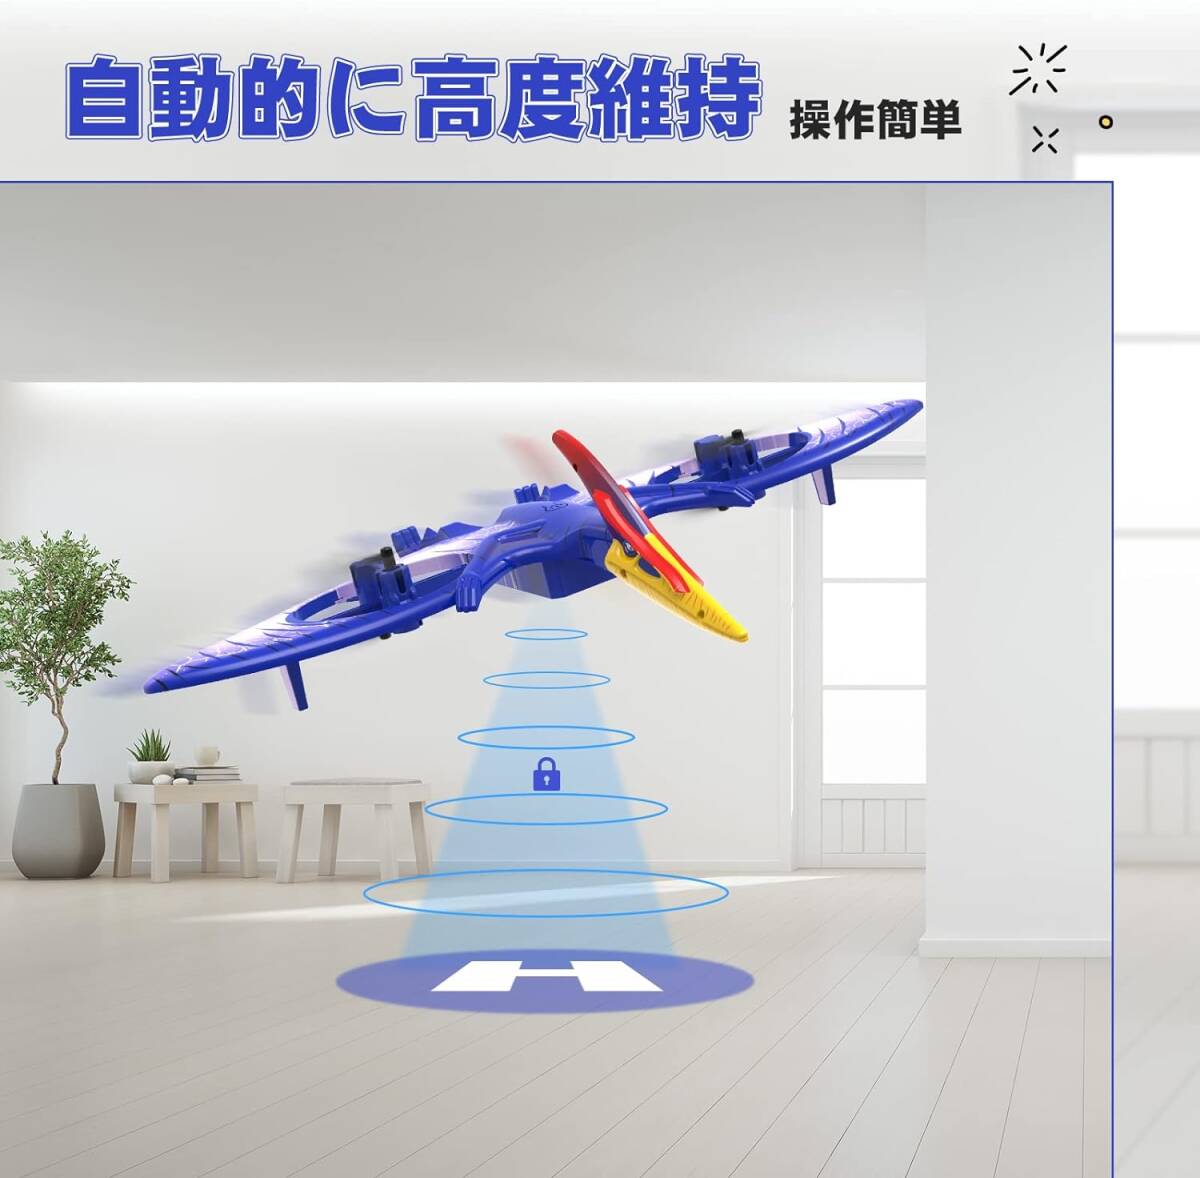  radio-controller interior also easily ... airplane for children glider toy drone 100g under LED light attaching light weight durability domestic certification ending 